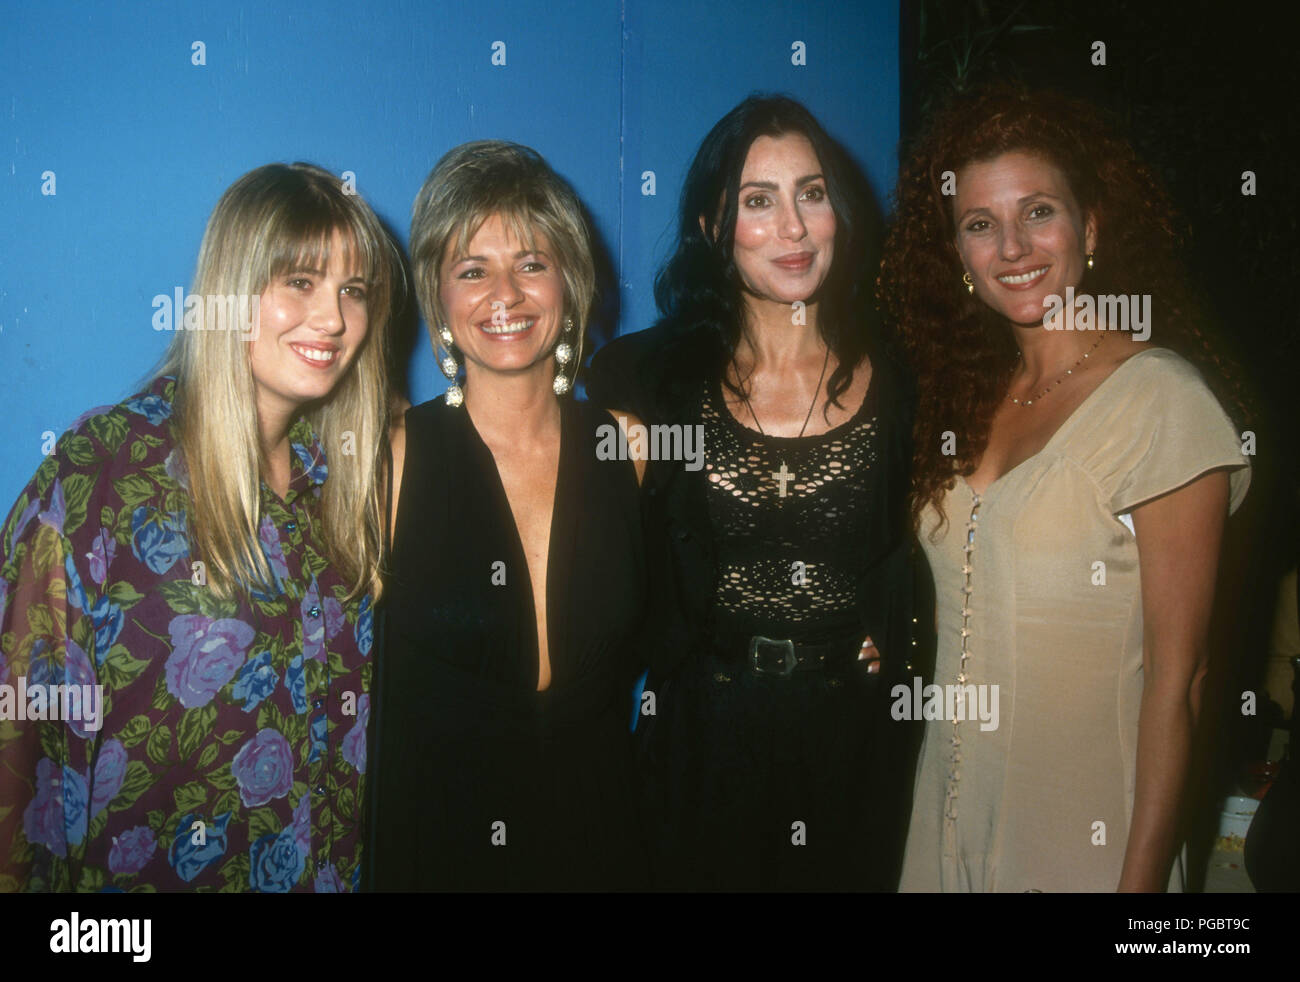 WEST HOLLYWOOD, CA - AUGUST 11: Chastity Bono (Chaz Bono), Christy Bono, singer/actress Cher and Paulette Betts attend Grand Opening of Bono's Restaurant on August 11, 1992 at Bono's Restaurant on Melrose Avenue in West Hollywood, California. Photo by Barry King/Alamy Stock Photo Stock Photo